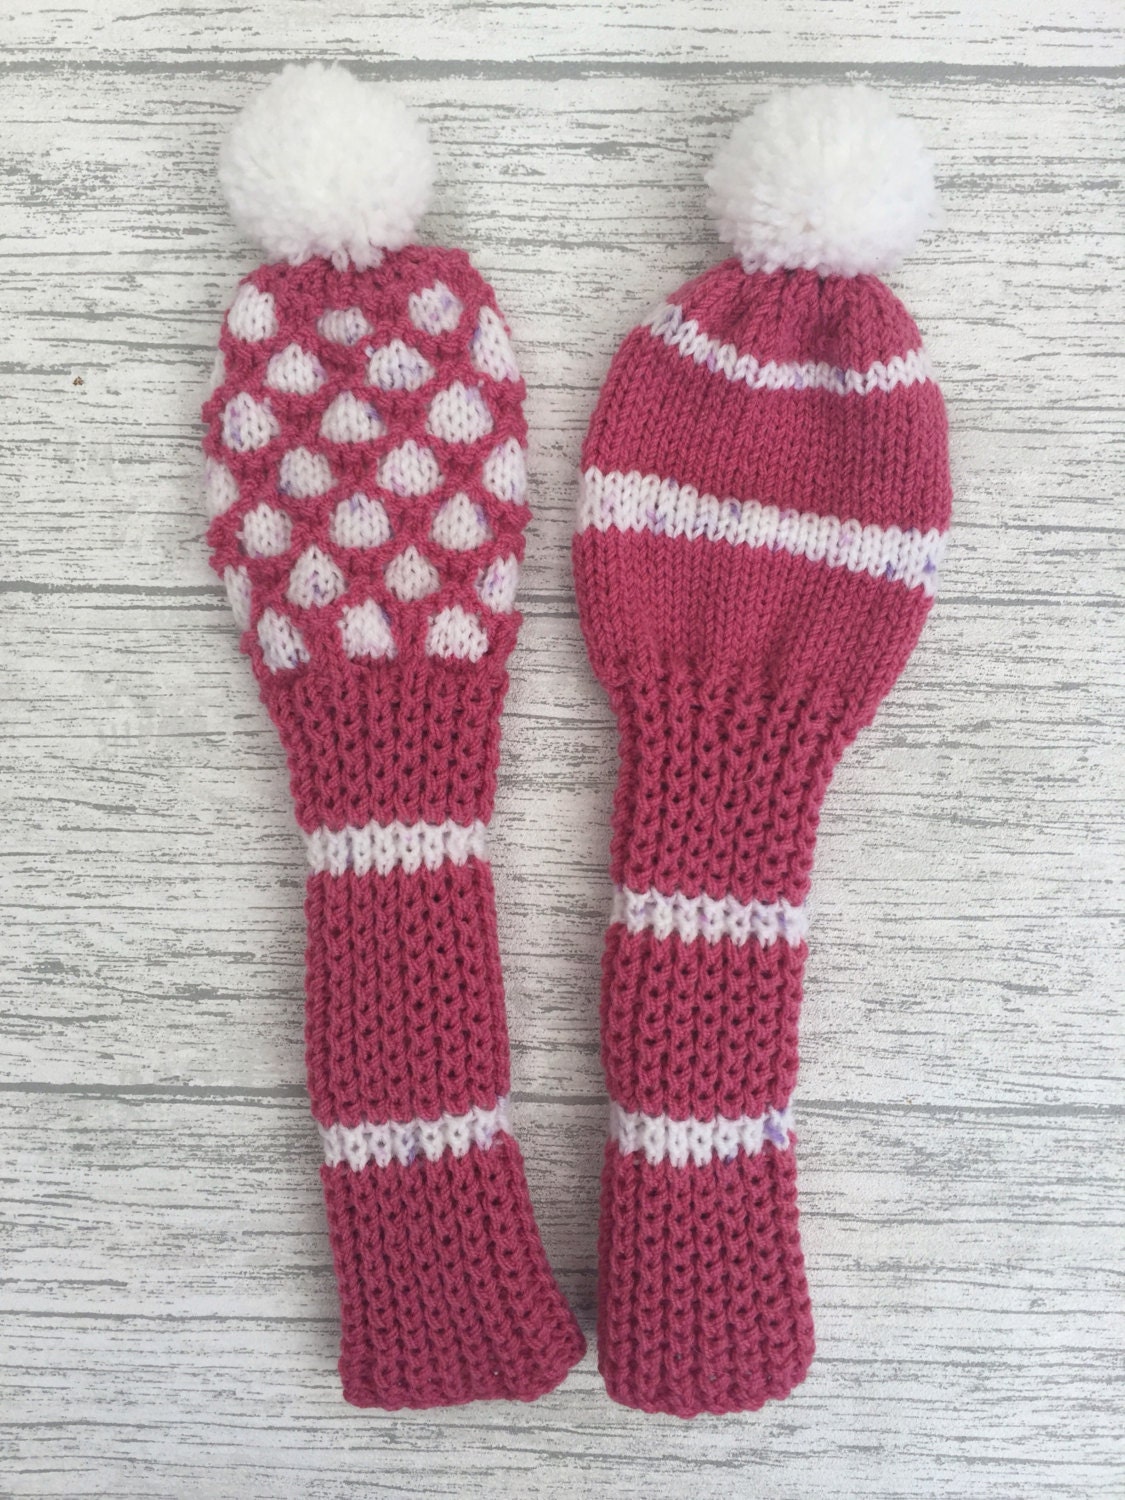 Golf club head cover set putter cover hand knitted covers